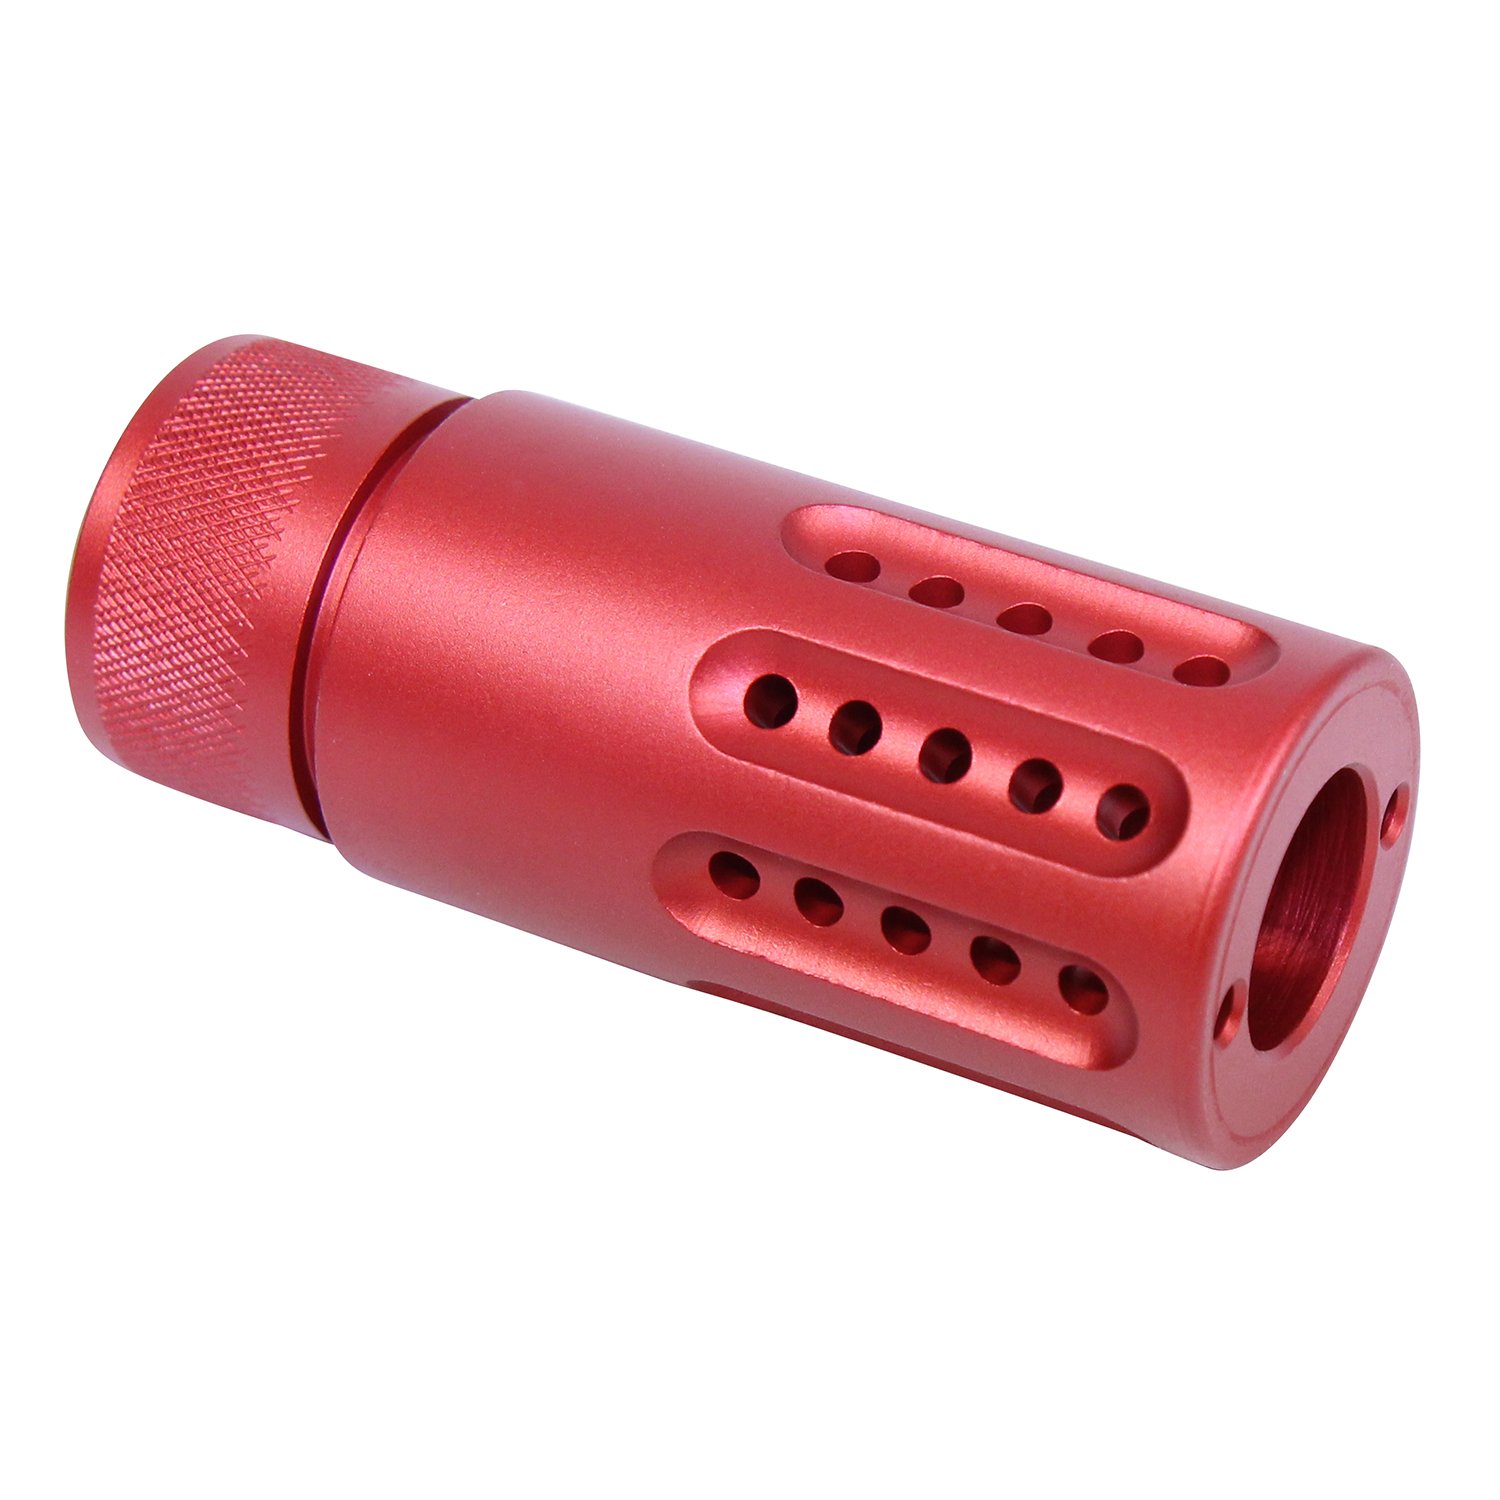 Micro barrel shroud and muzzle brake for AR-15 .308, finished in anodized red